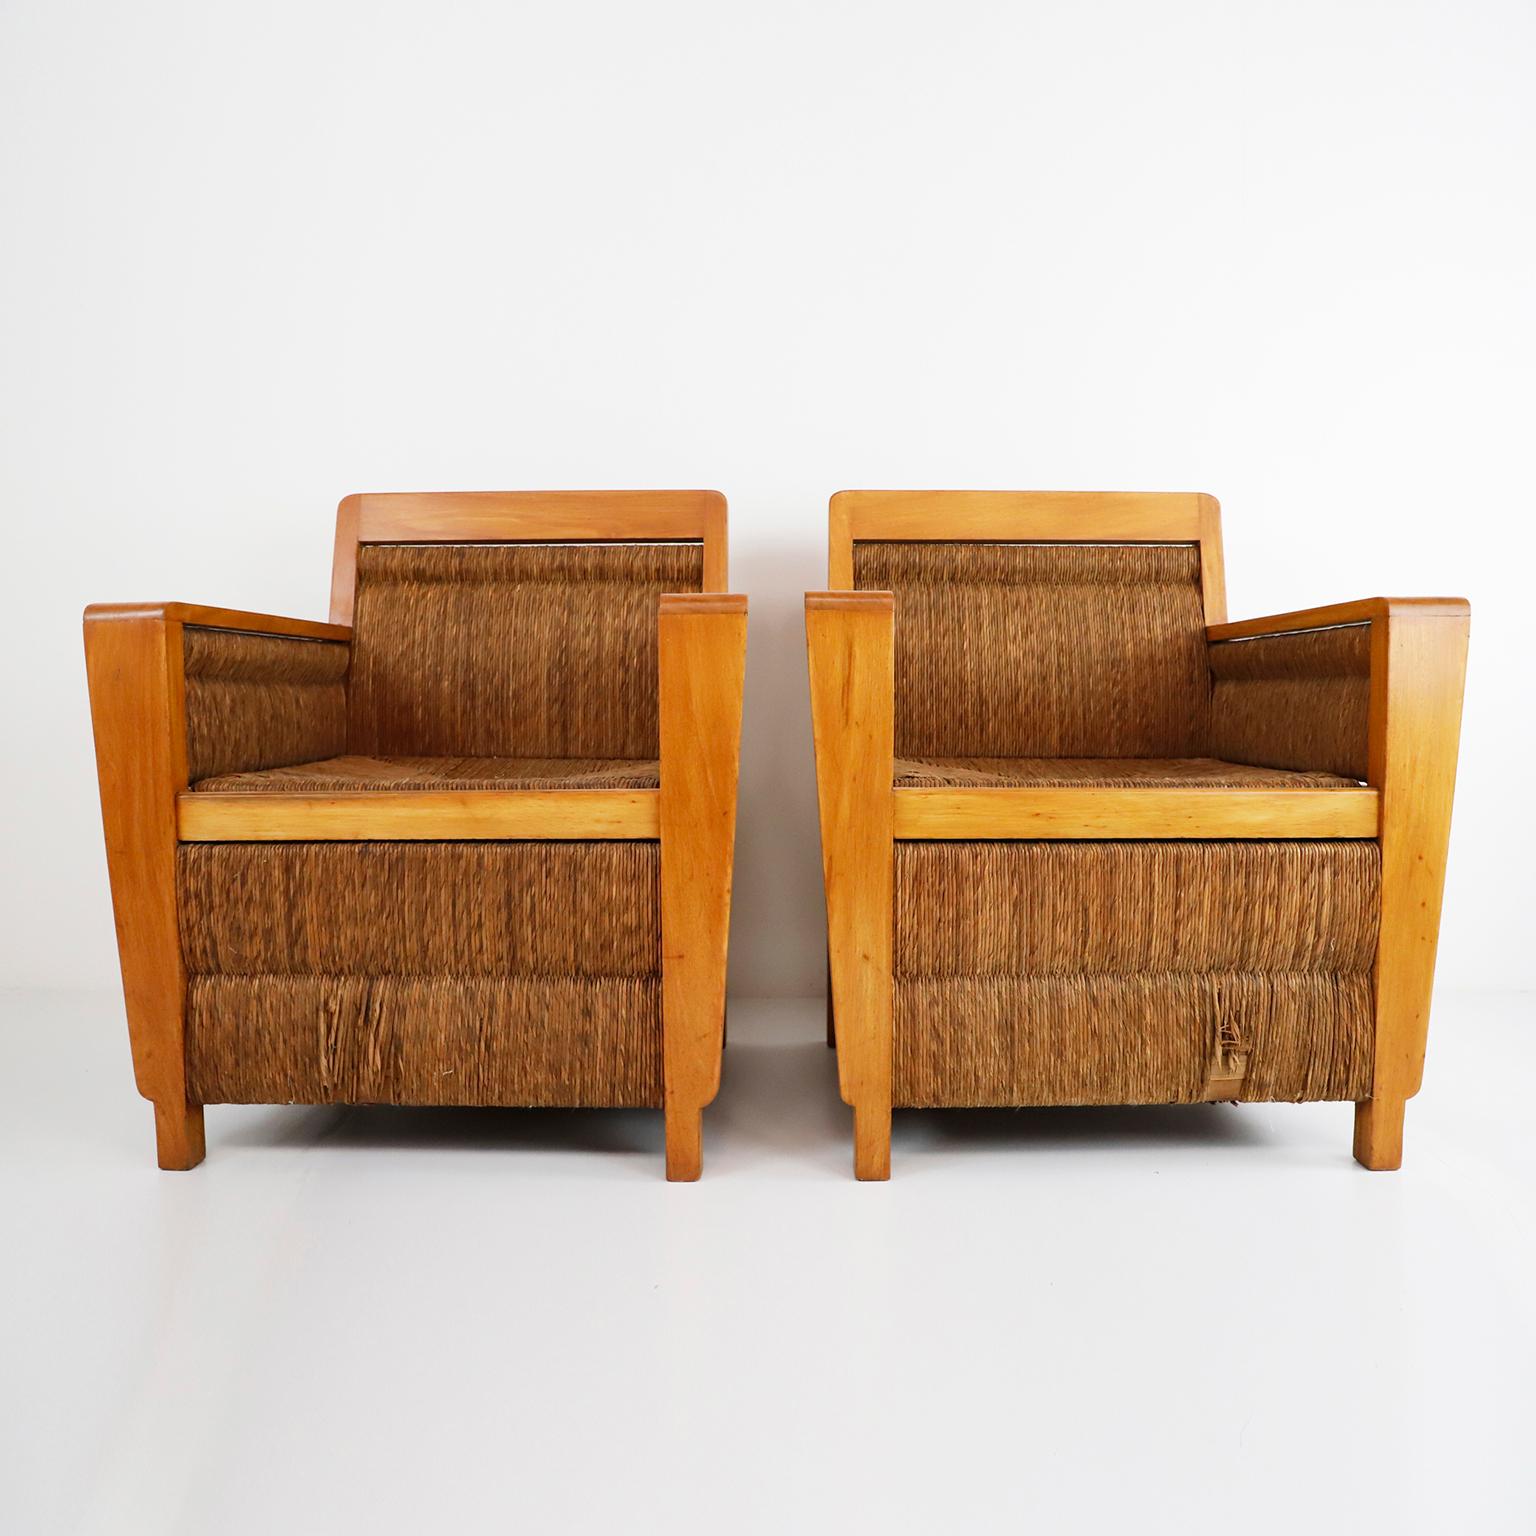 Pair of Mexican Mid-Century Modern woven Armchairs made in the 1950s in Primavera wood and palm cords. Featuring simple but elegant modern frames , this armchairs provides a surprising amount of comfort with its beautifully woven seat. The chair is